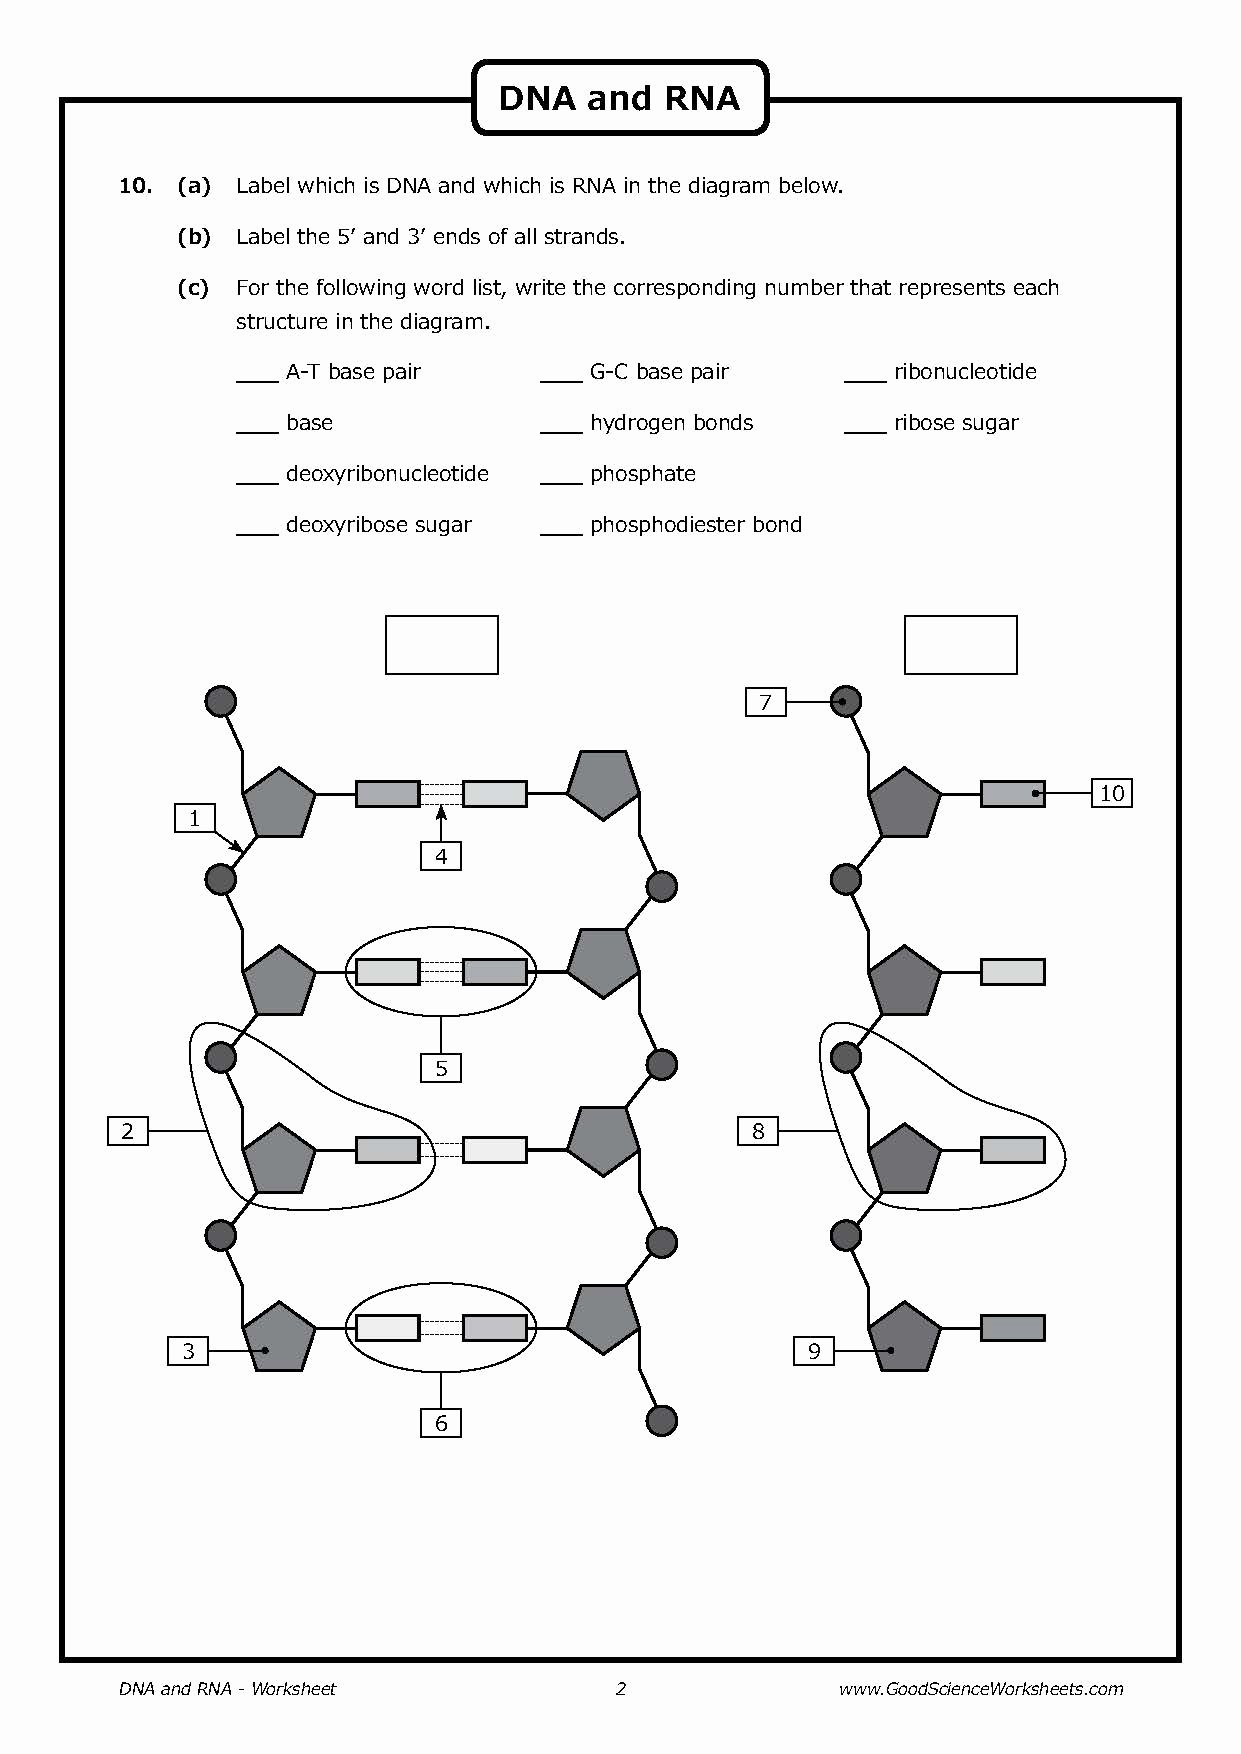 Lovely Dna Replication Coloring Worksheet Answer Key  Coloring Pages As Well As Dna Replication Coloring Worksheet Answer Key